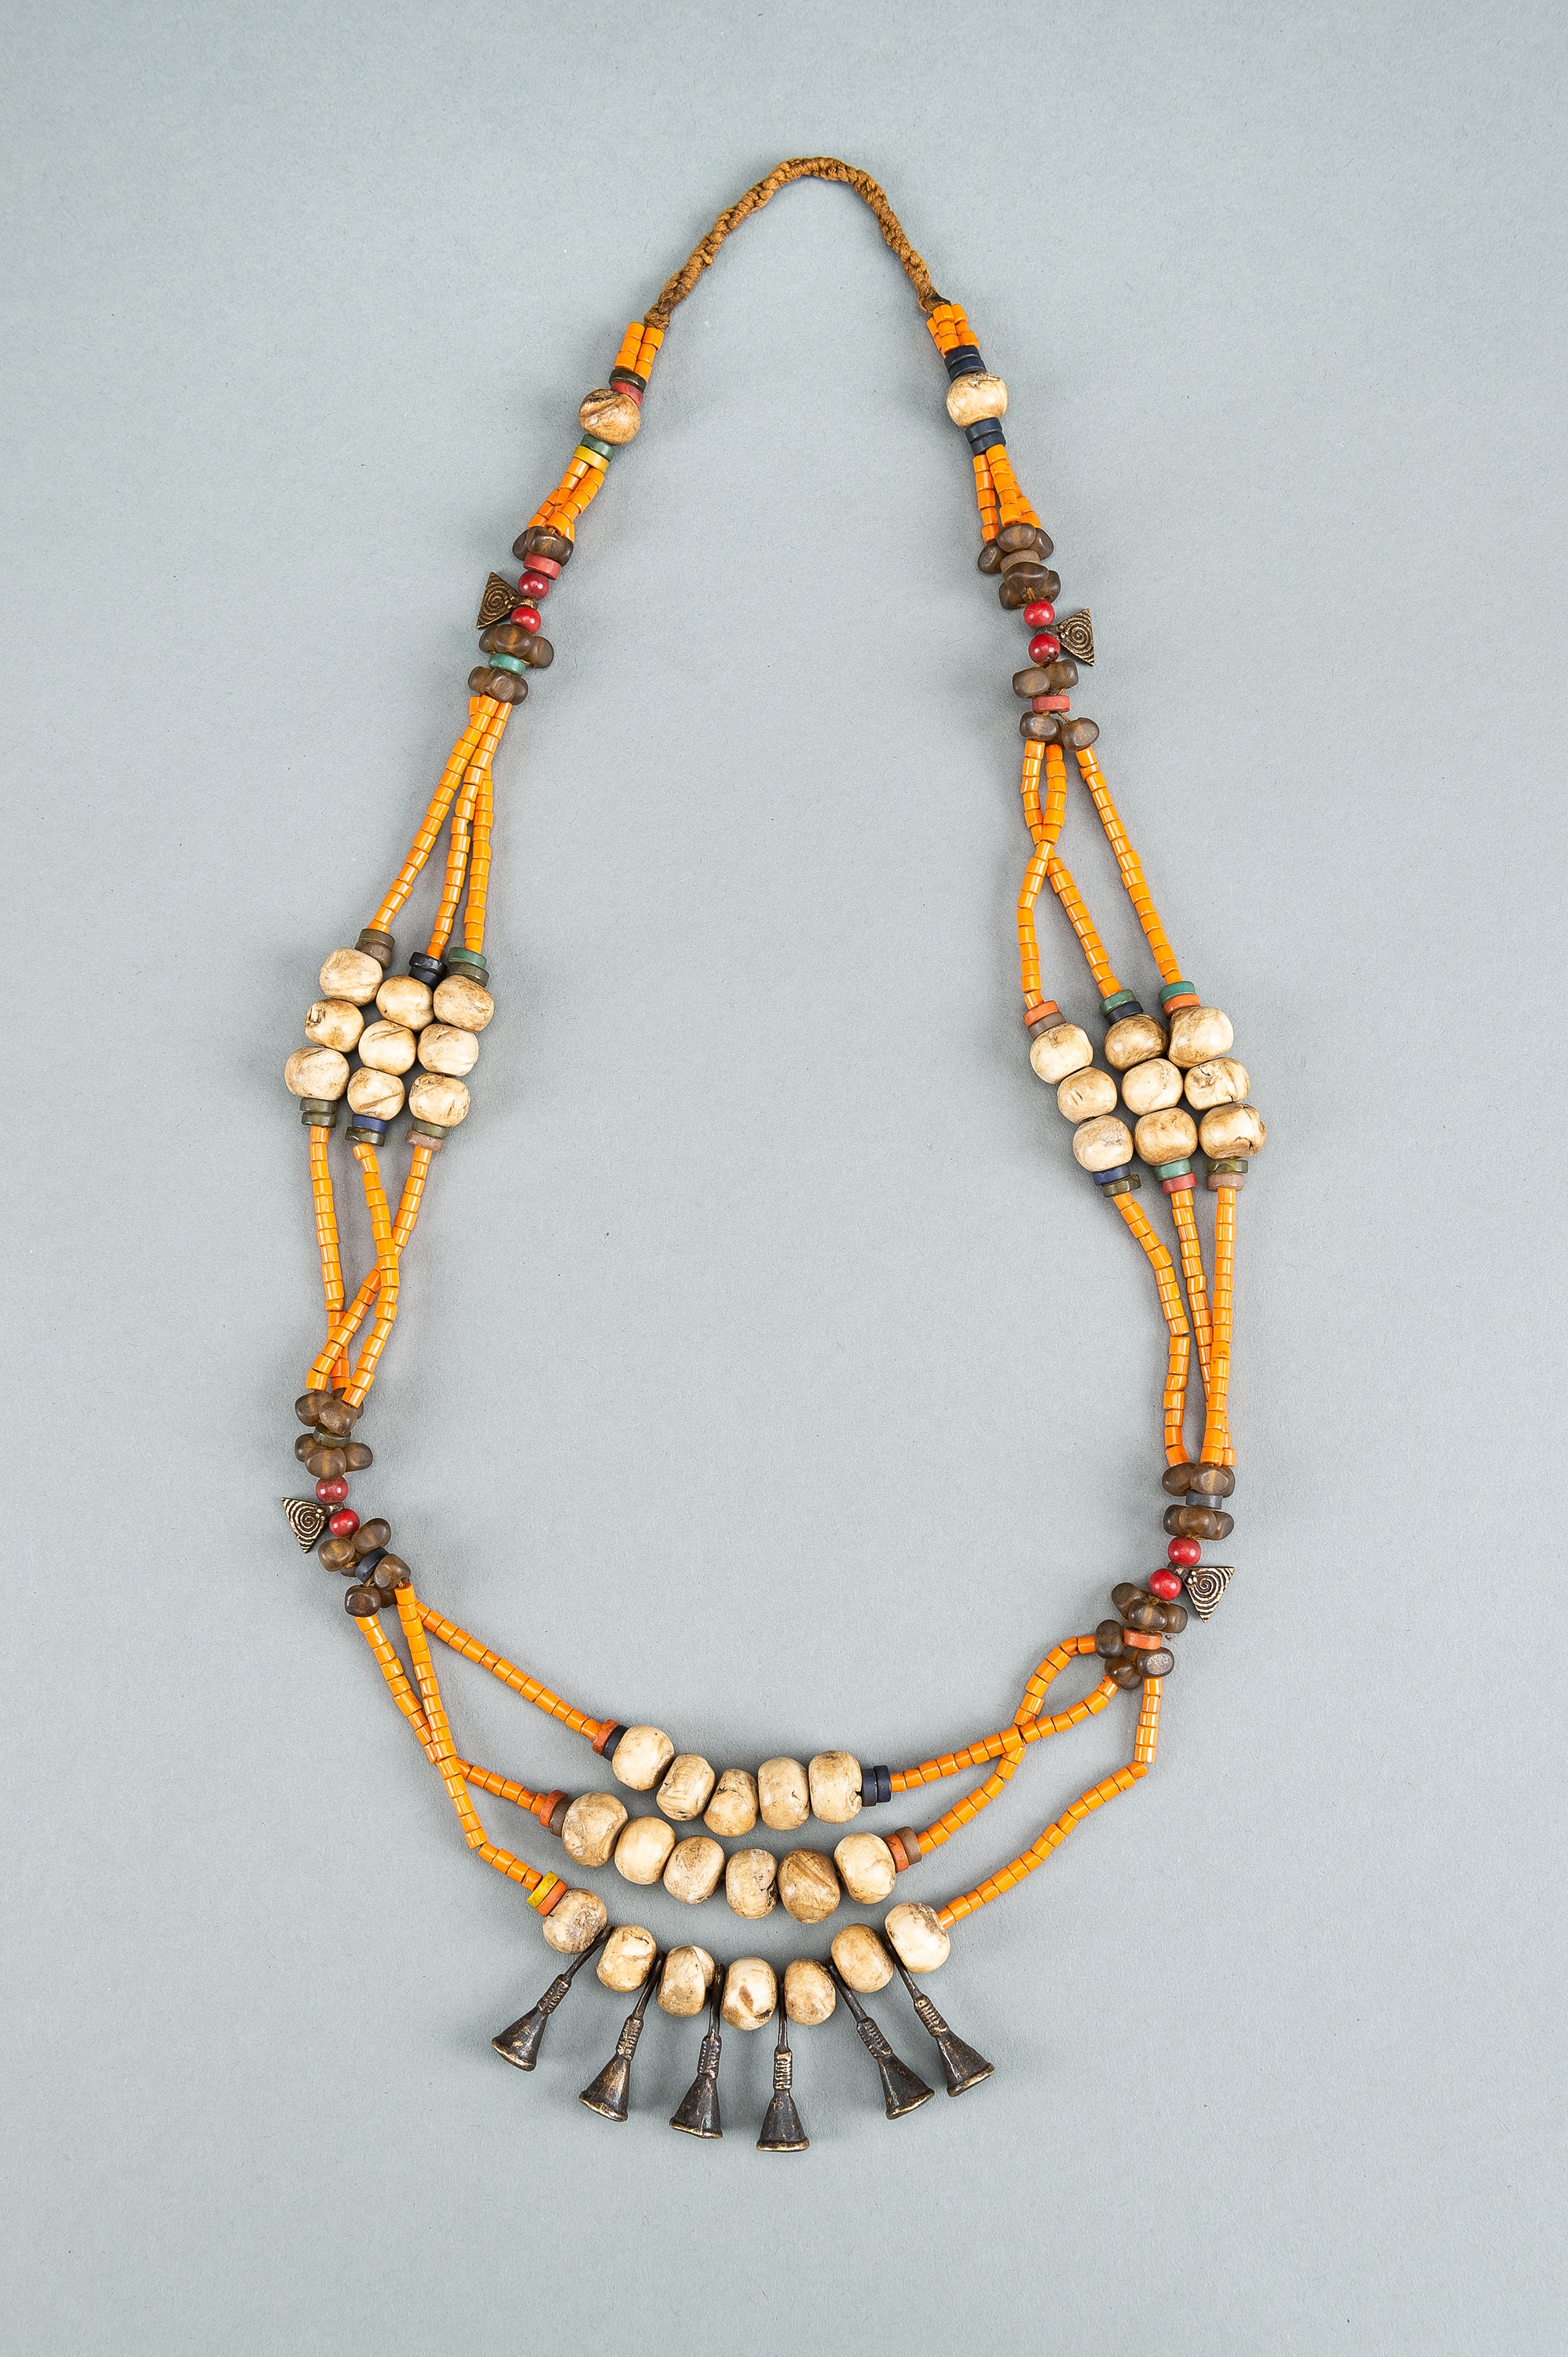 A NAGALAND MULTI-COLORED GLASS, BRASS AND SHELL NECKLACE, c. 1900s